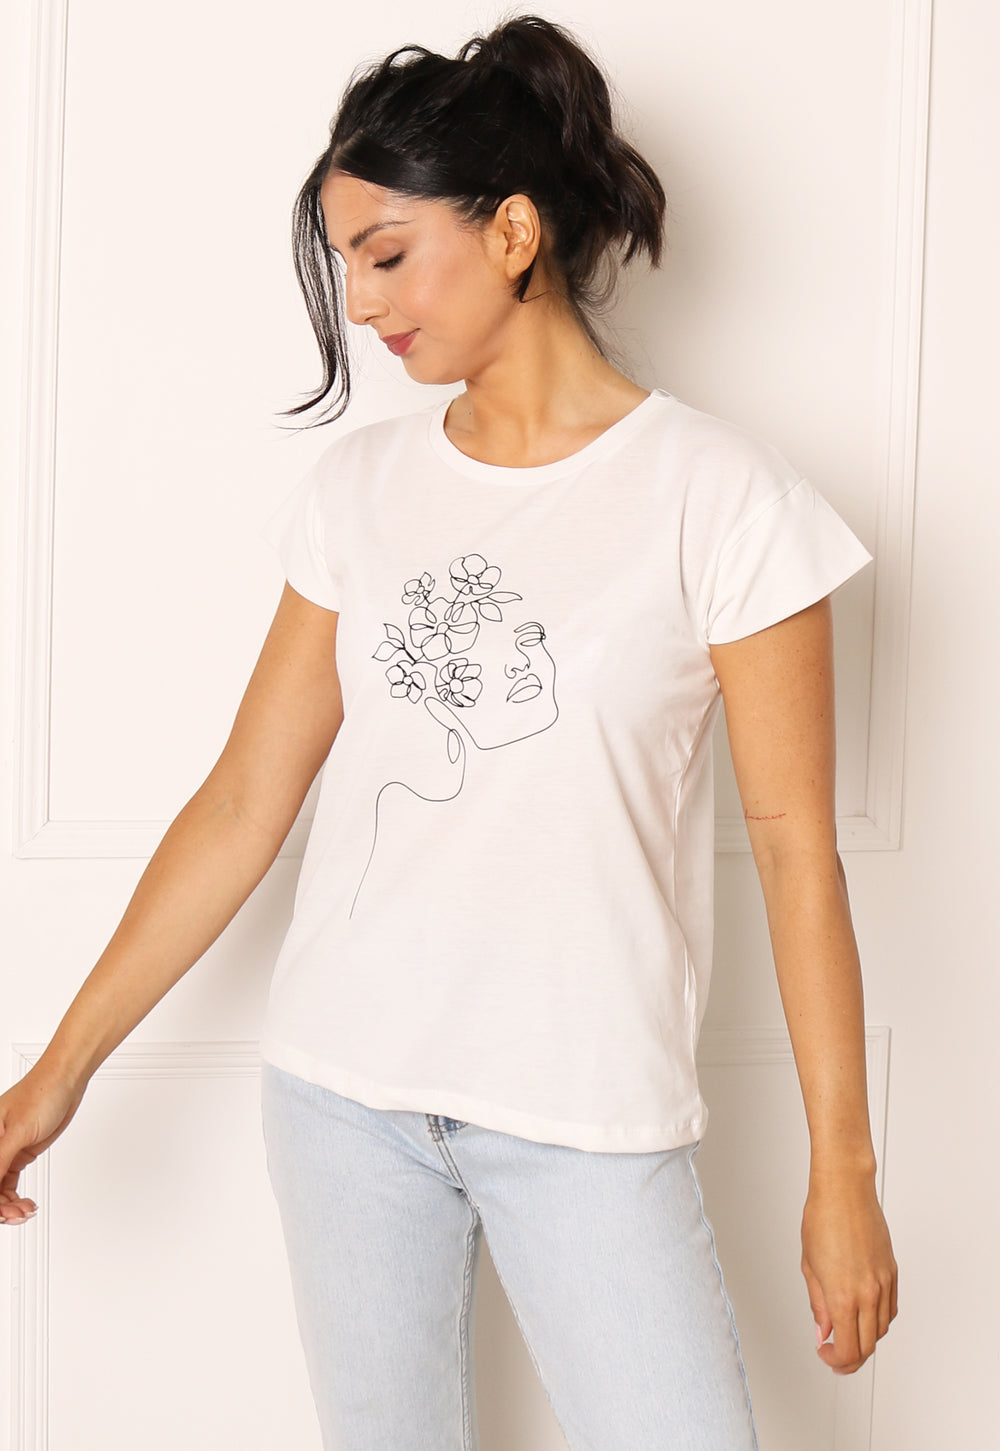 VILA Abstract One Line Woman's Face Drawing T-shirt in White - One Nation Clothing